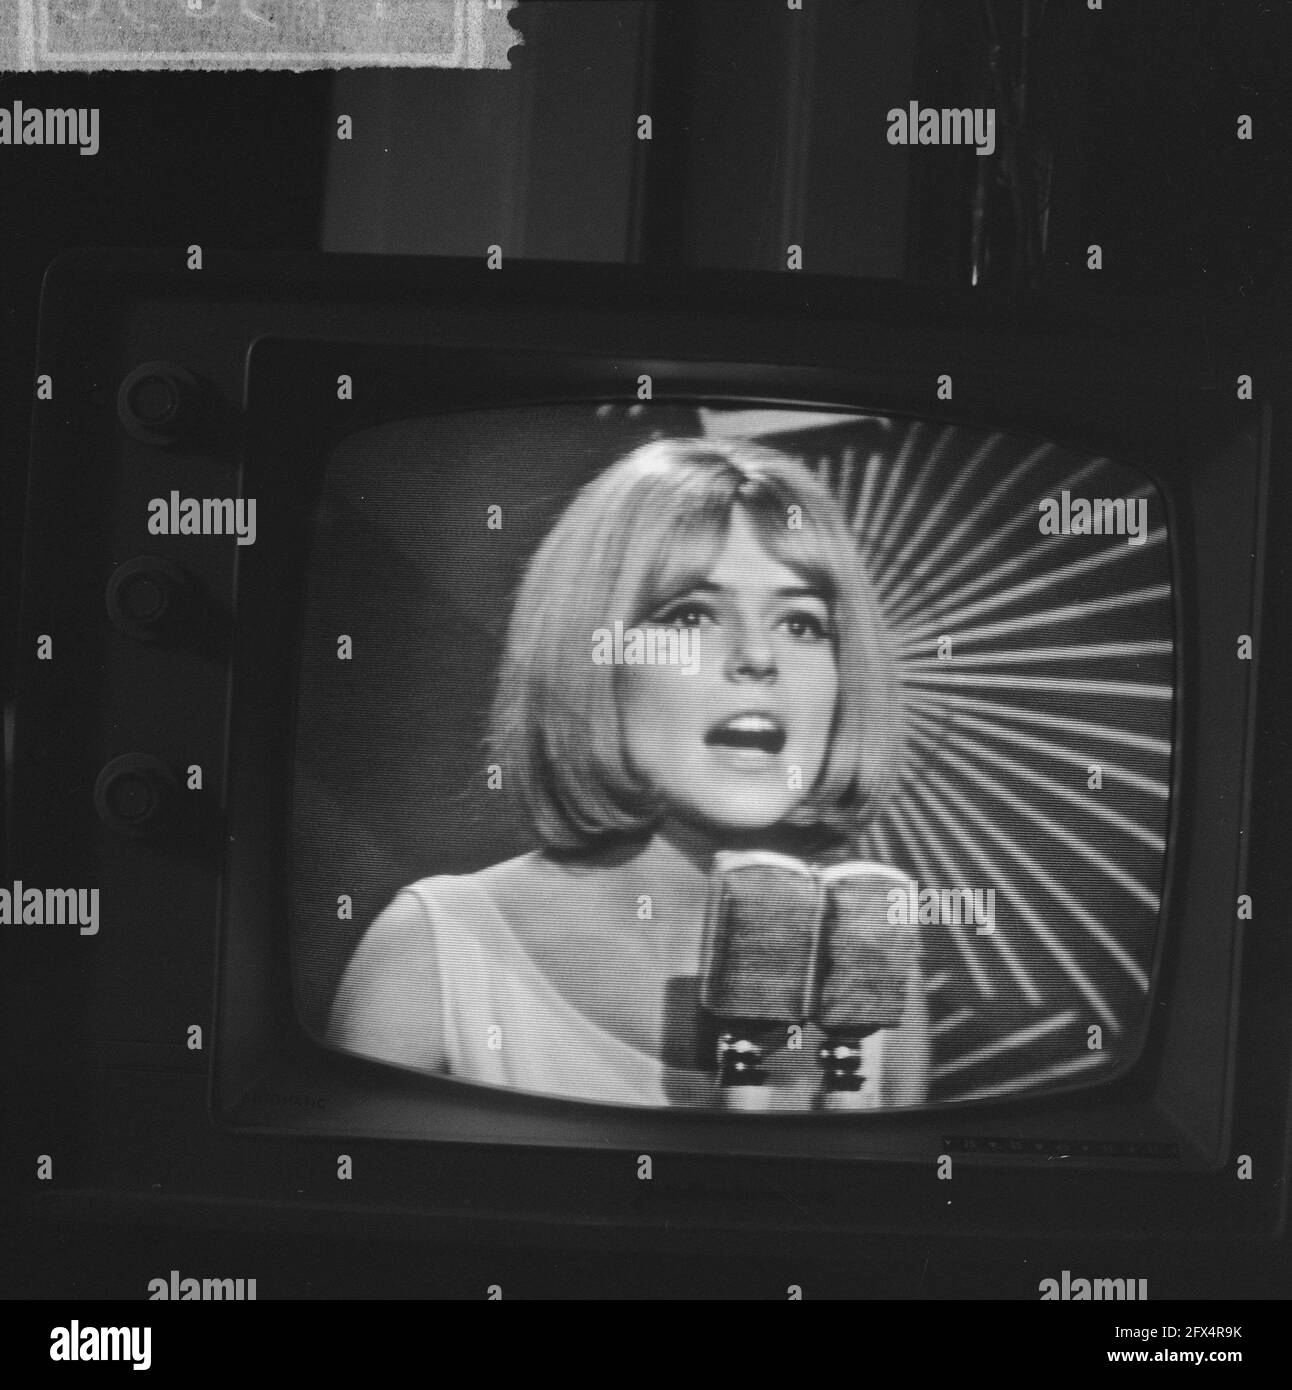 France Gall (1965)